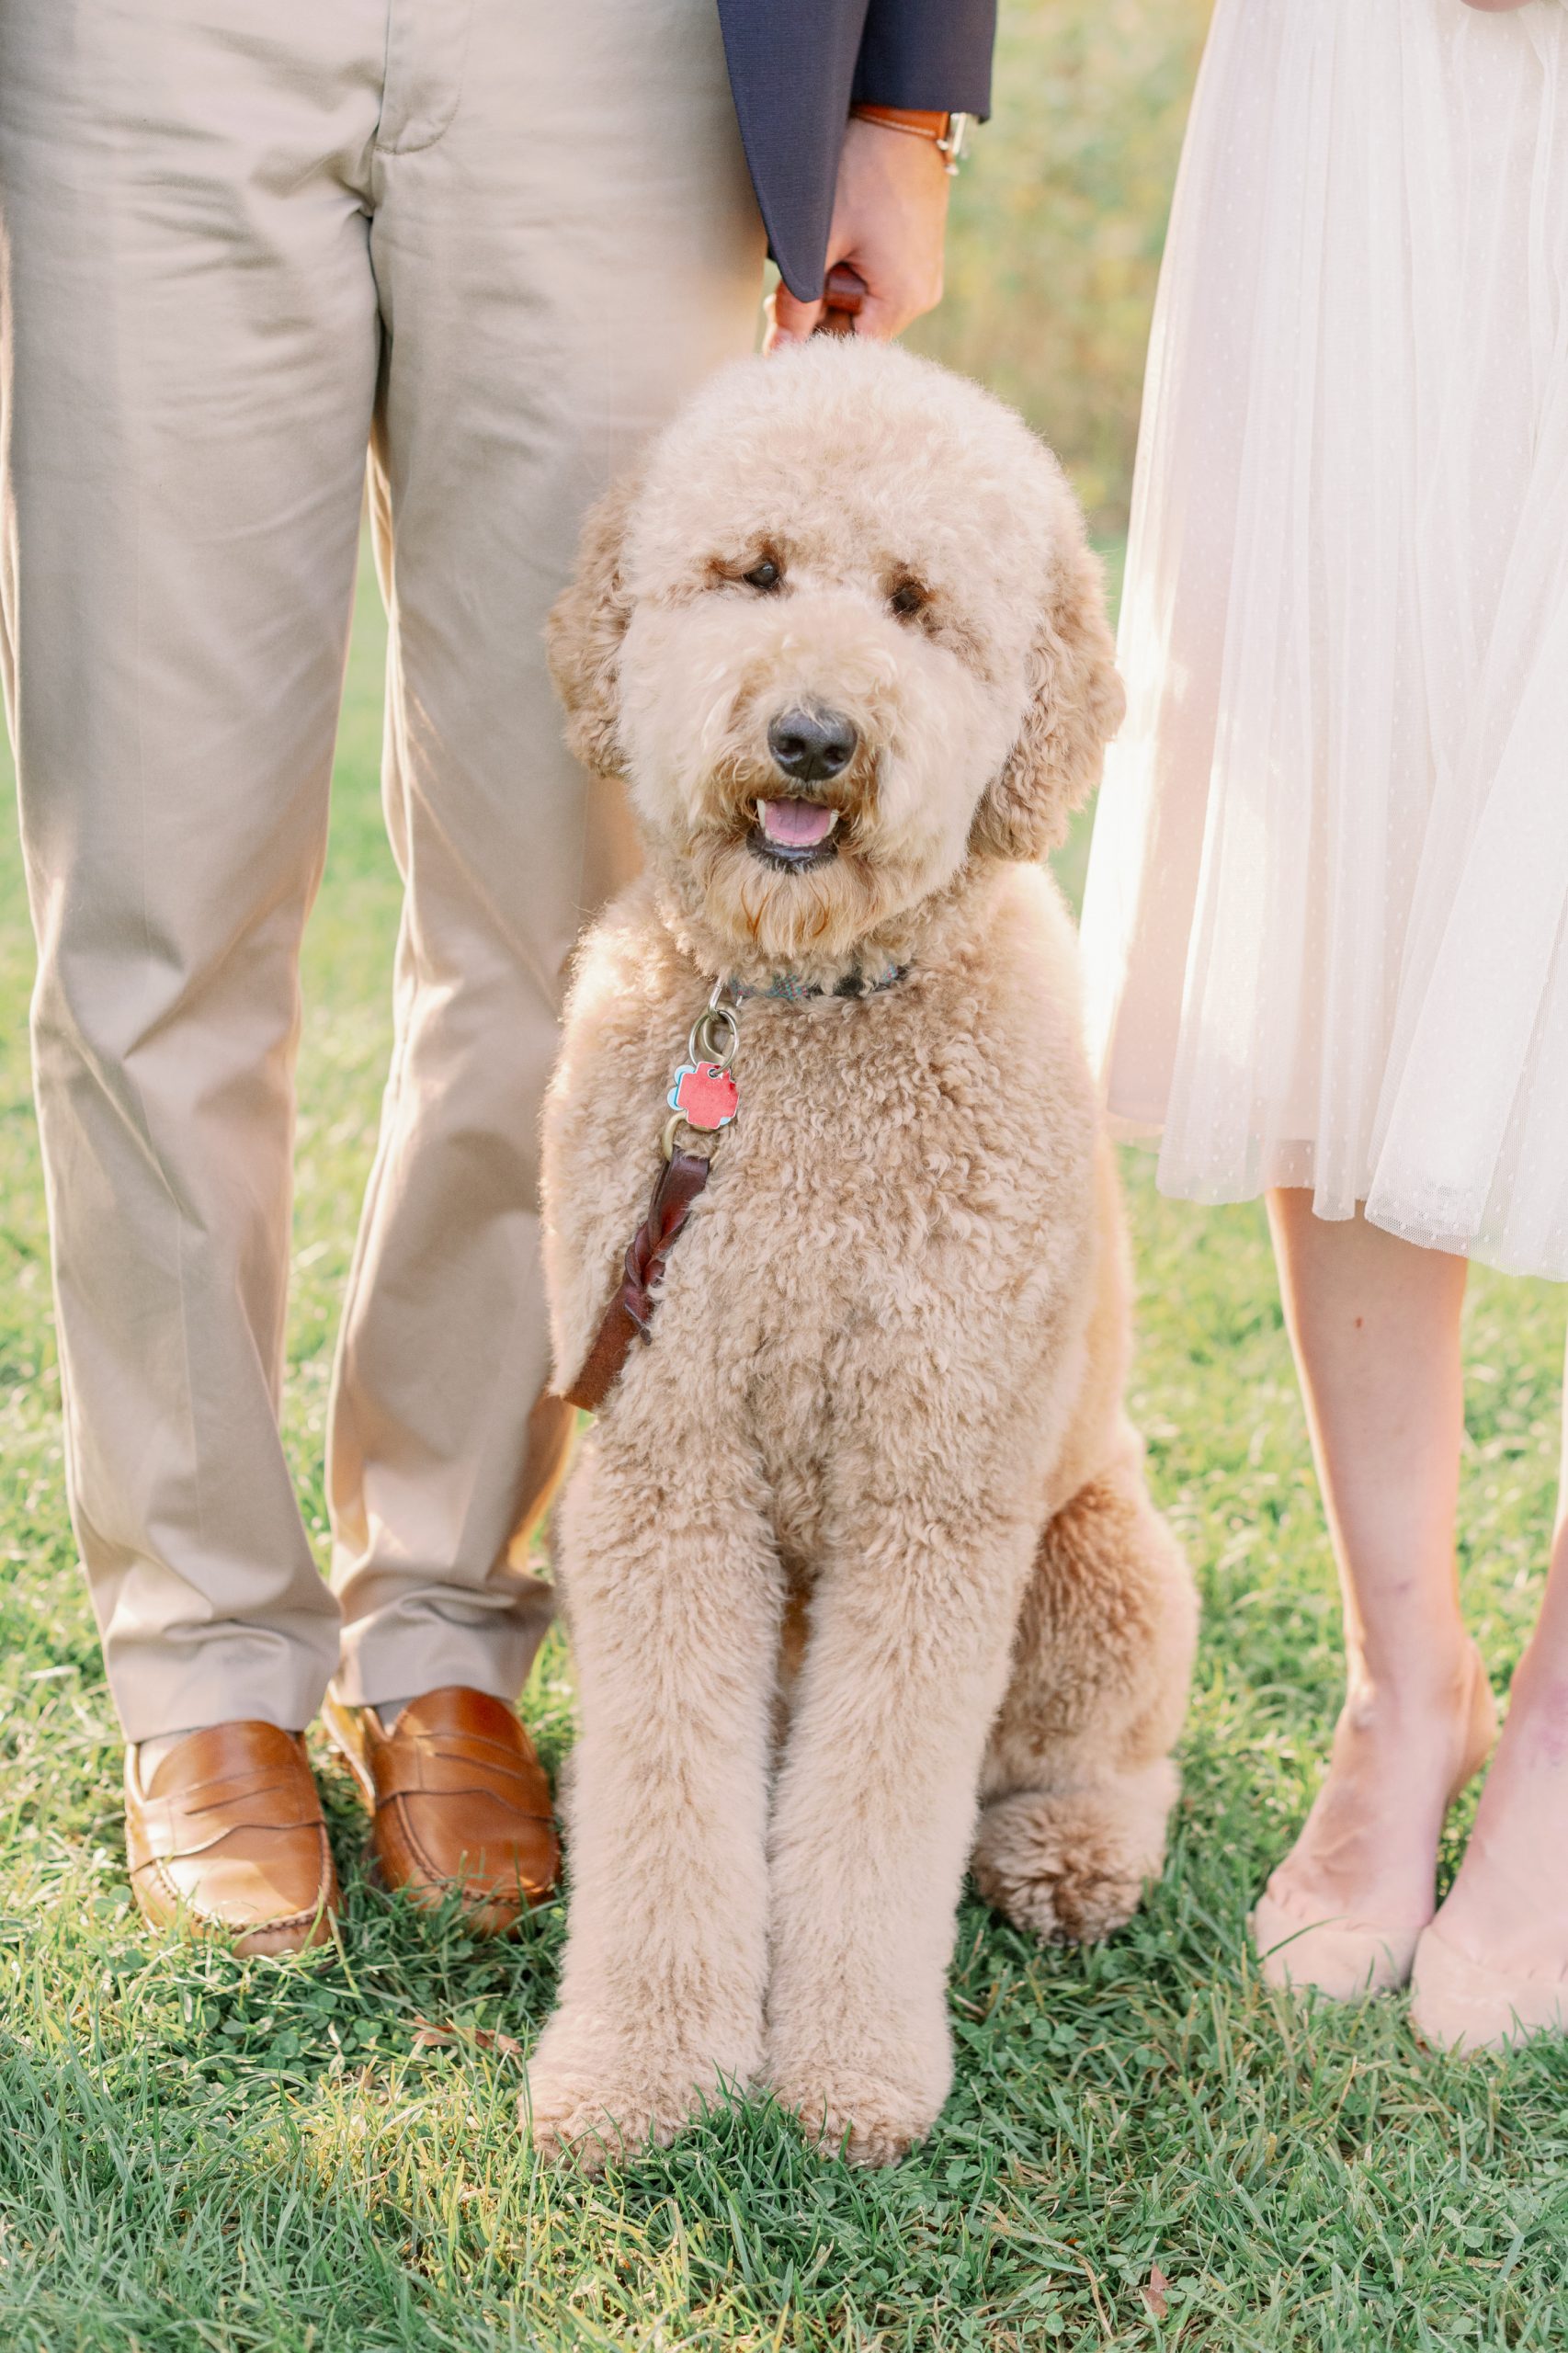 Include your dog in your family photos - 8 tips and advice for having dog in photos